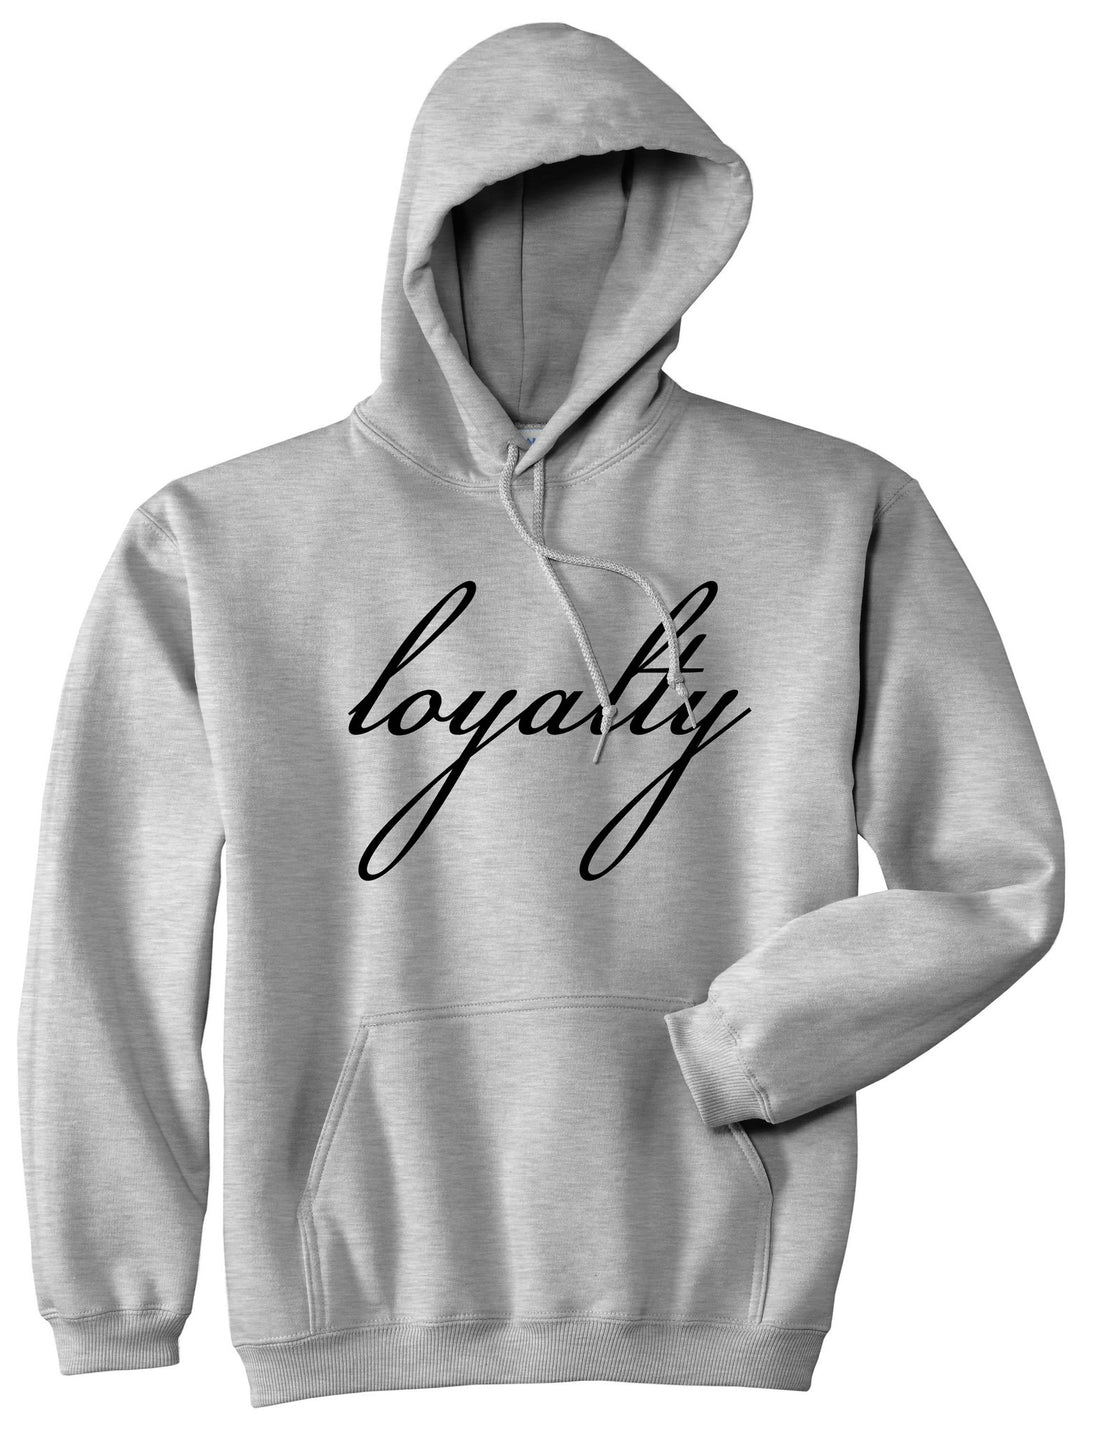 Loyalty Respect Aint New York Hoes Boys Kids Pullover Hoodie Hoody In Grey by Kings Of NY